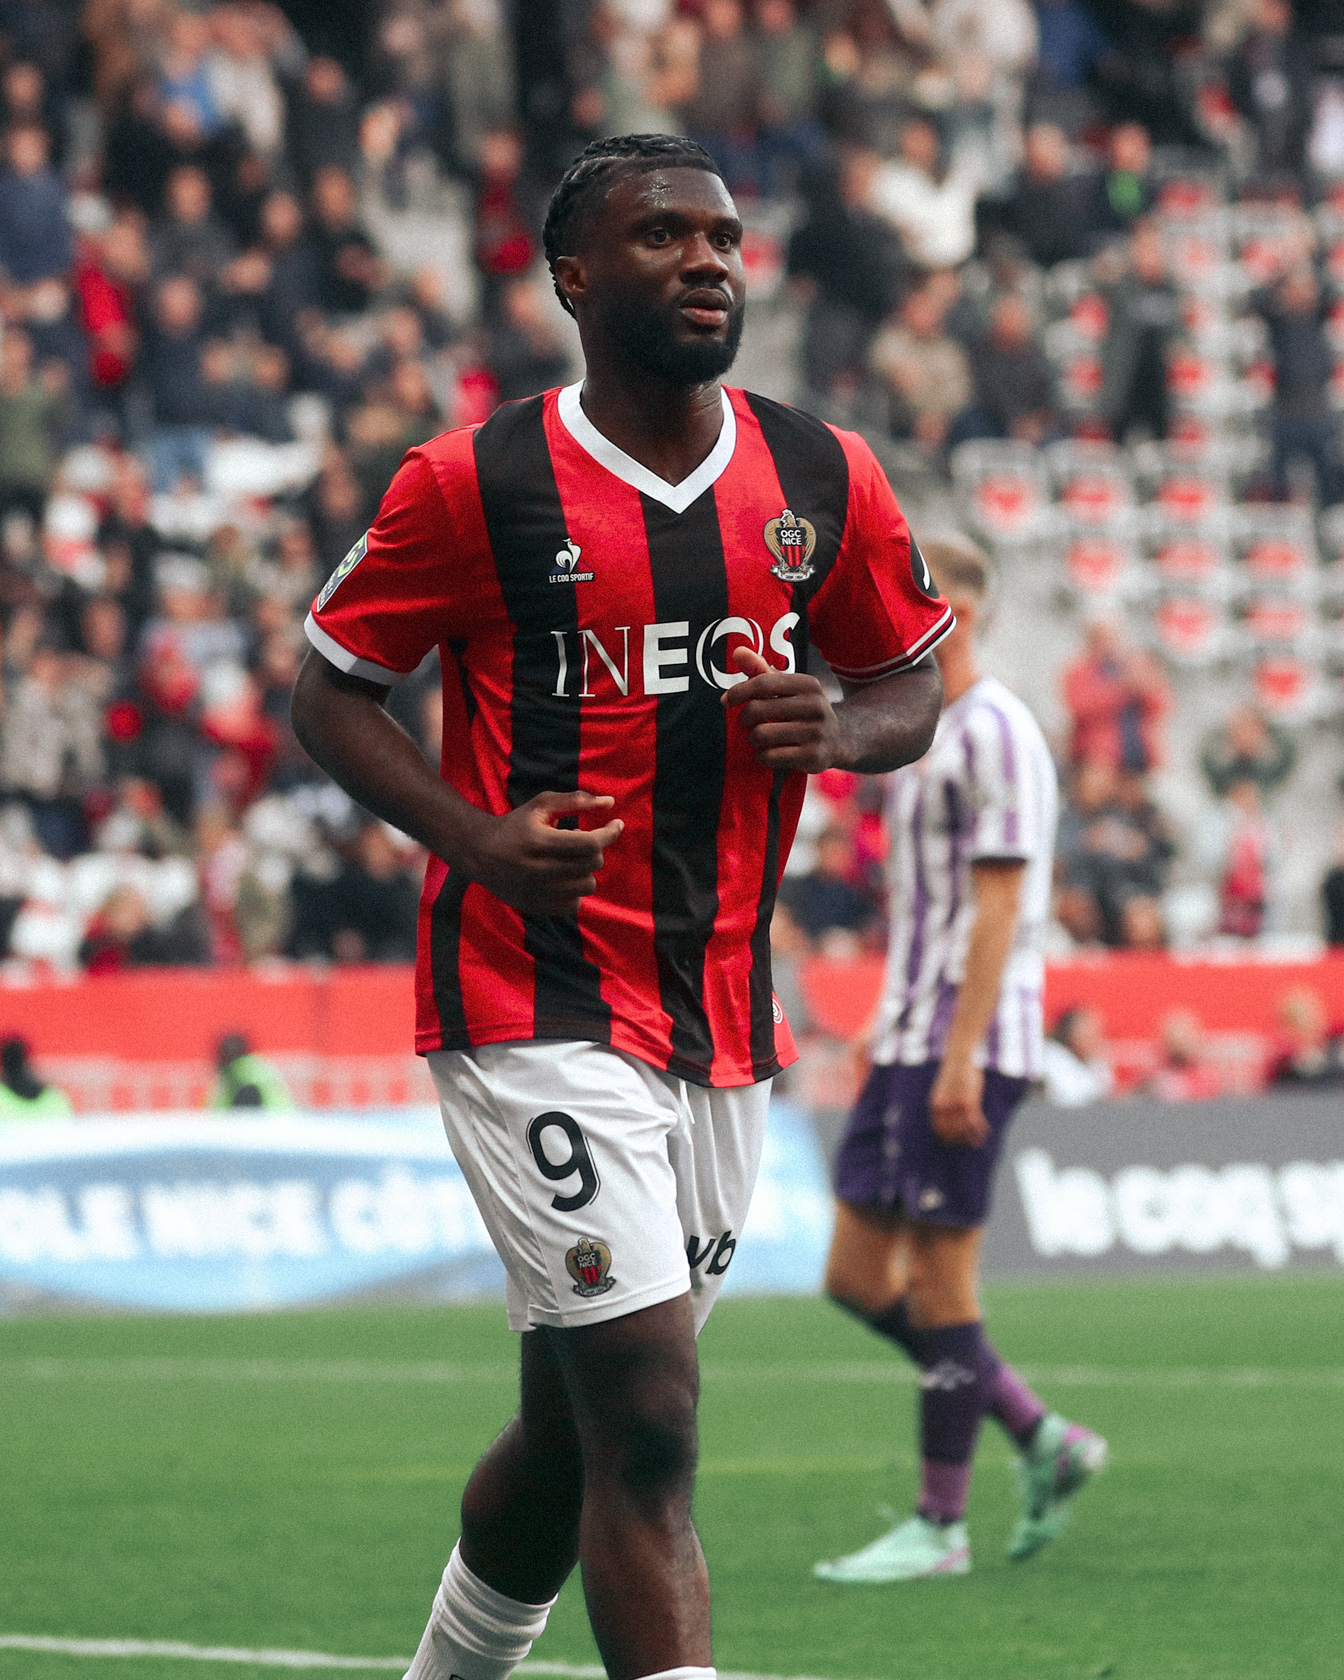 Terem Moffi with the match winner for Nice against Toulouse